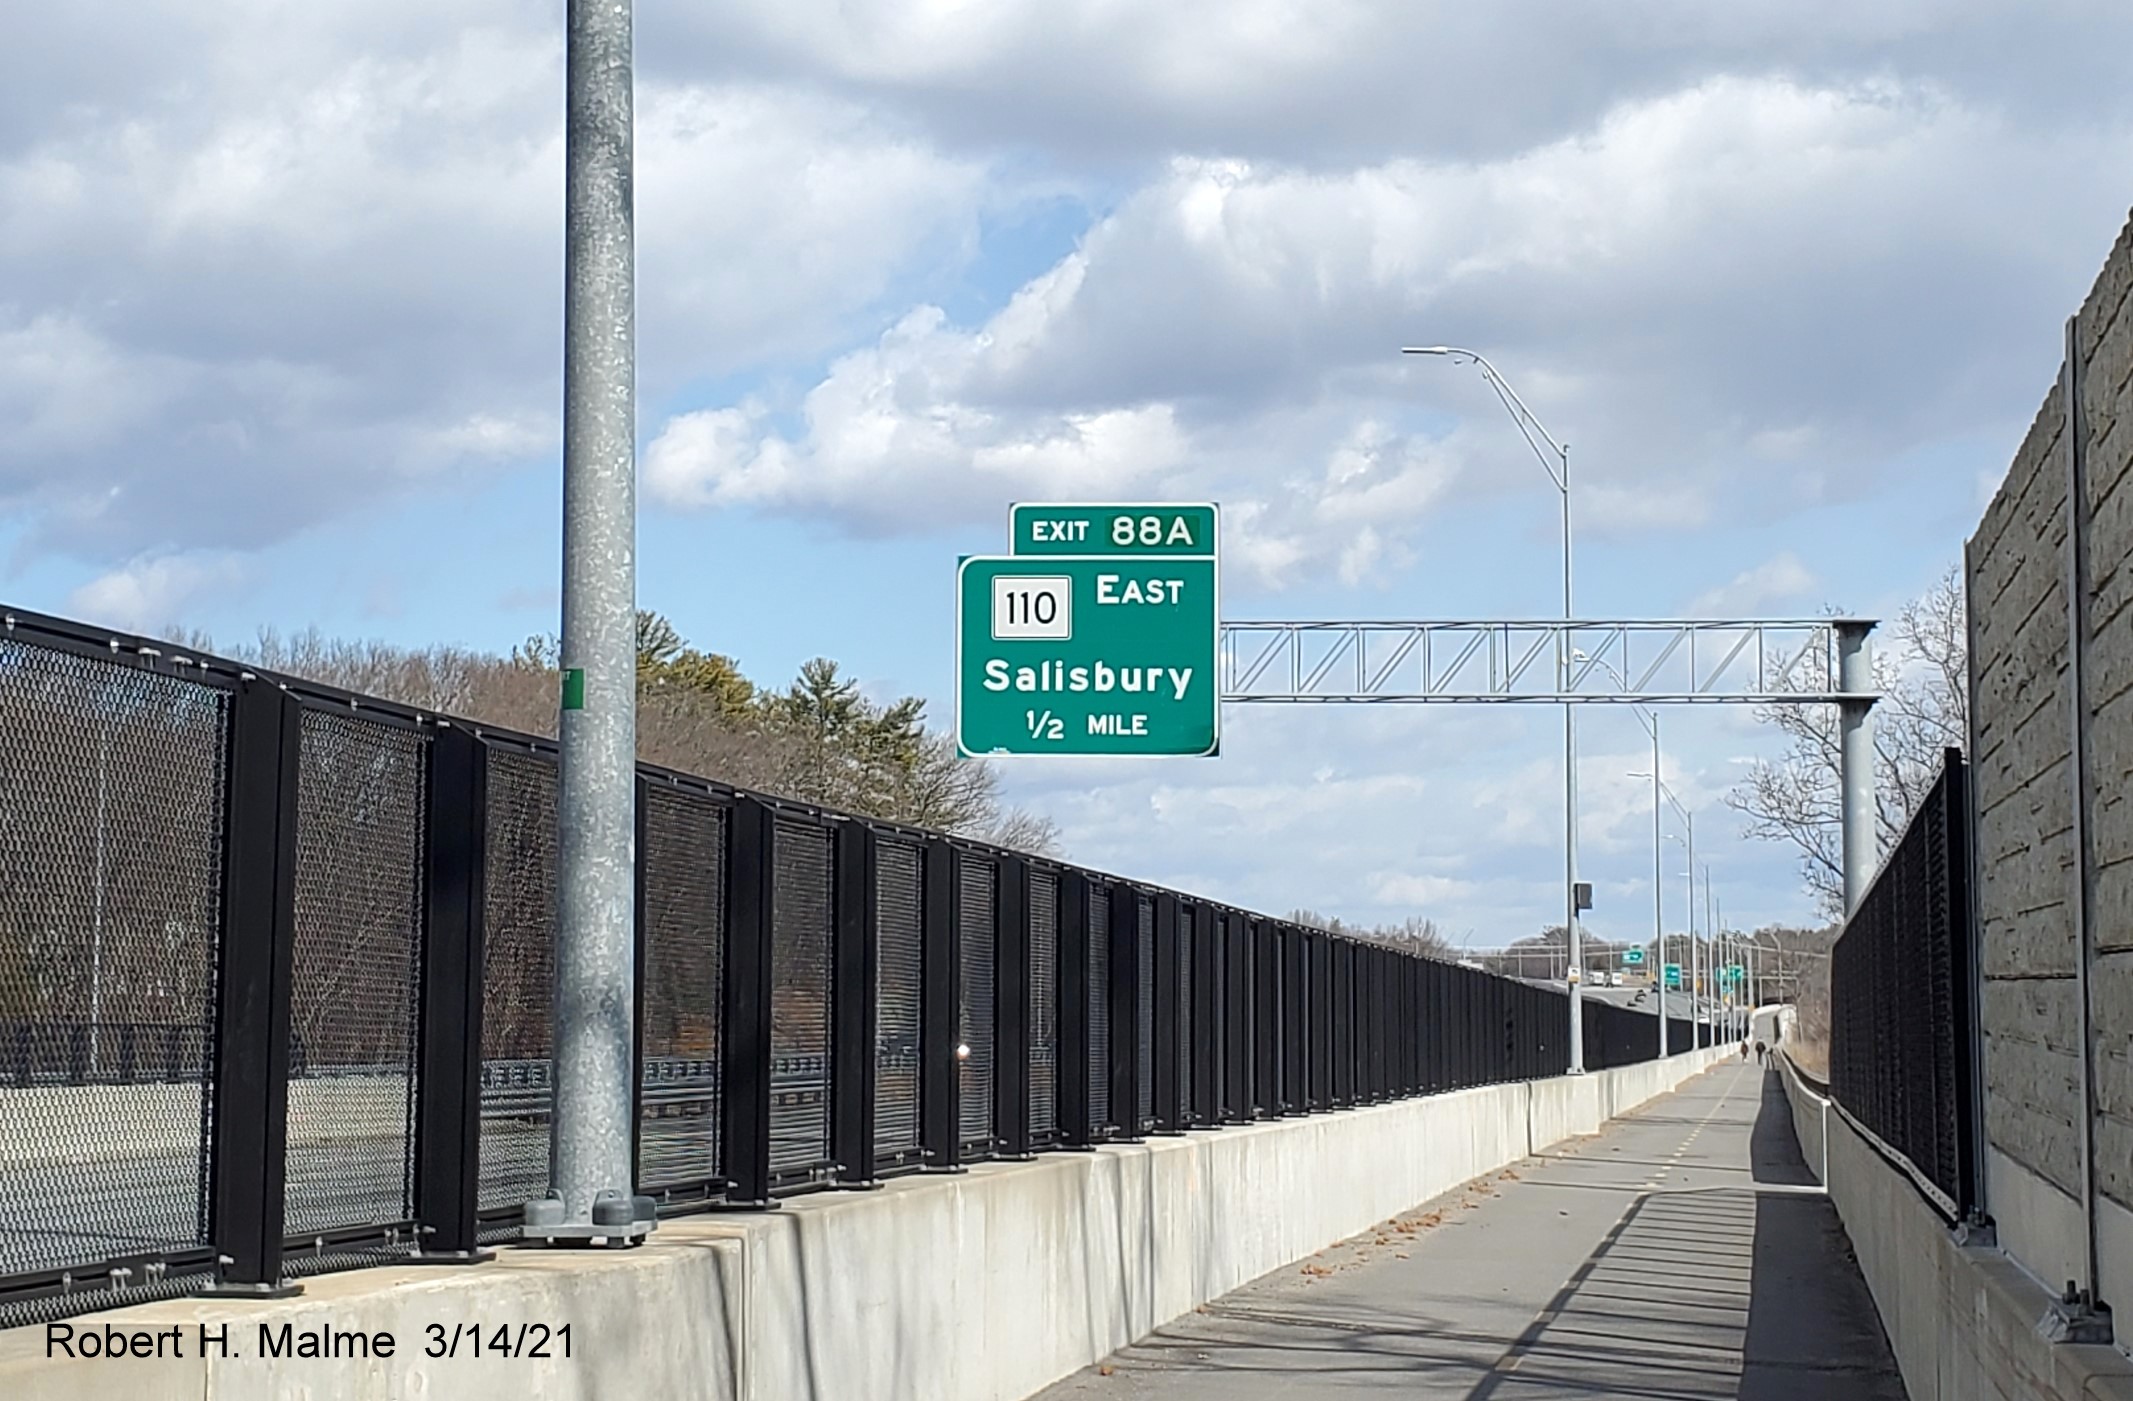 Image of 1/2 mile advance overhead sign for MA 110 exit with new milepost based exit number from Garrison Trail paralleling I-95 North in Amesbury, March 2021